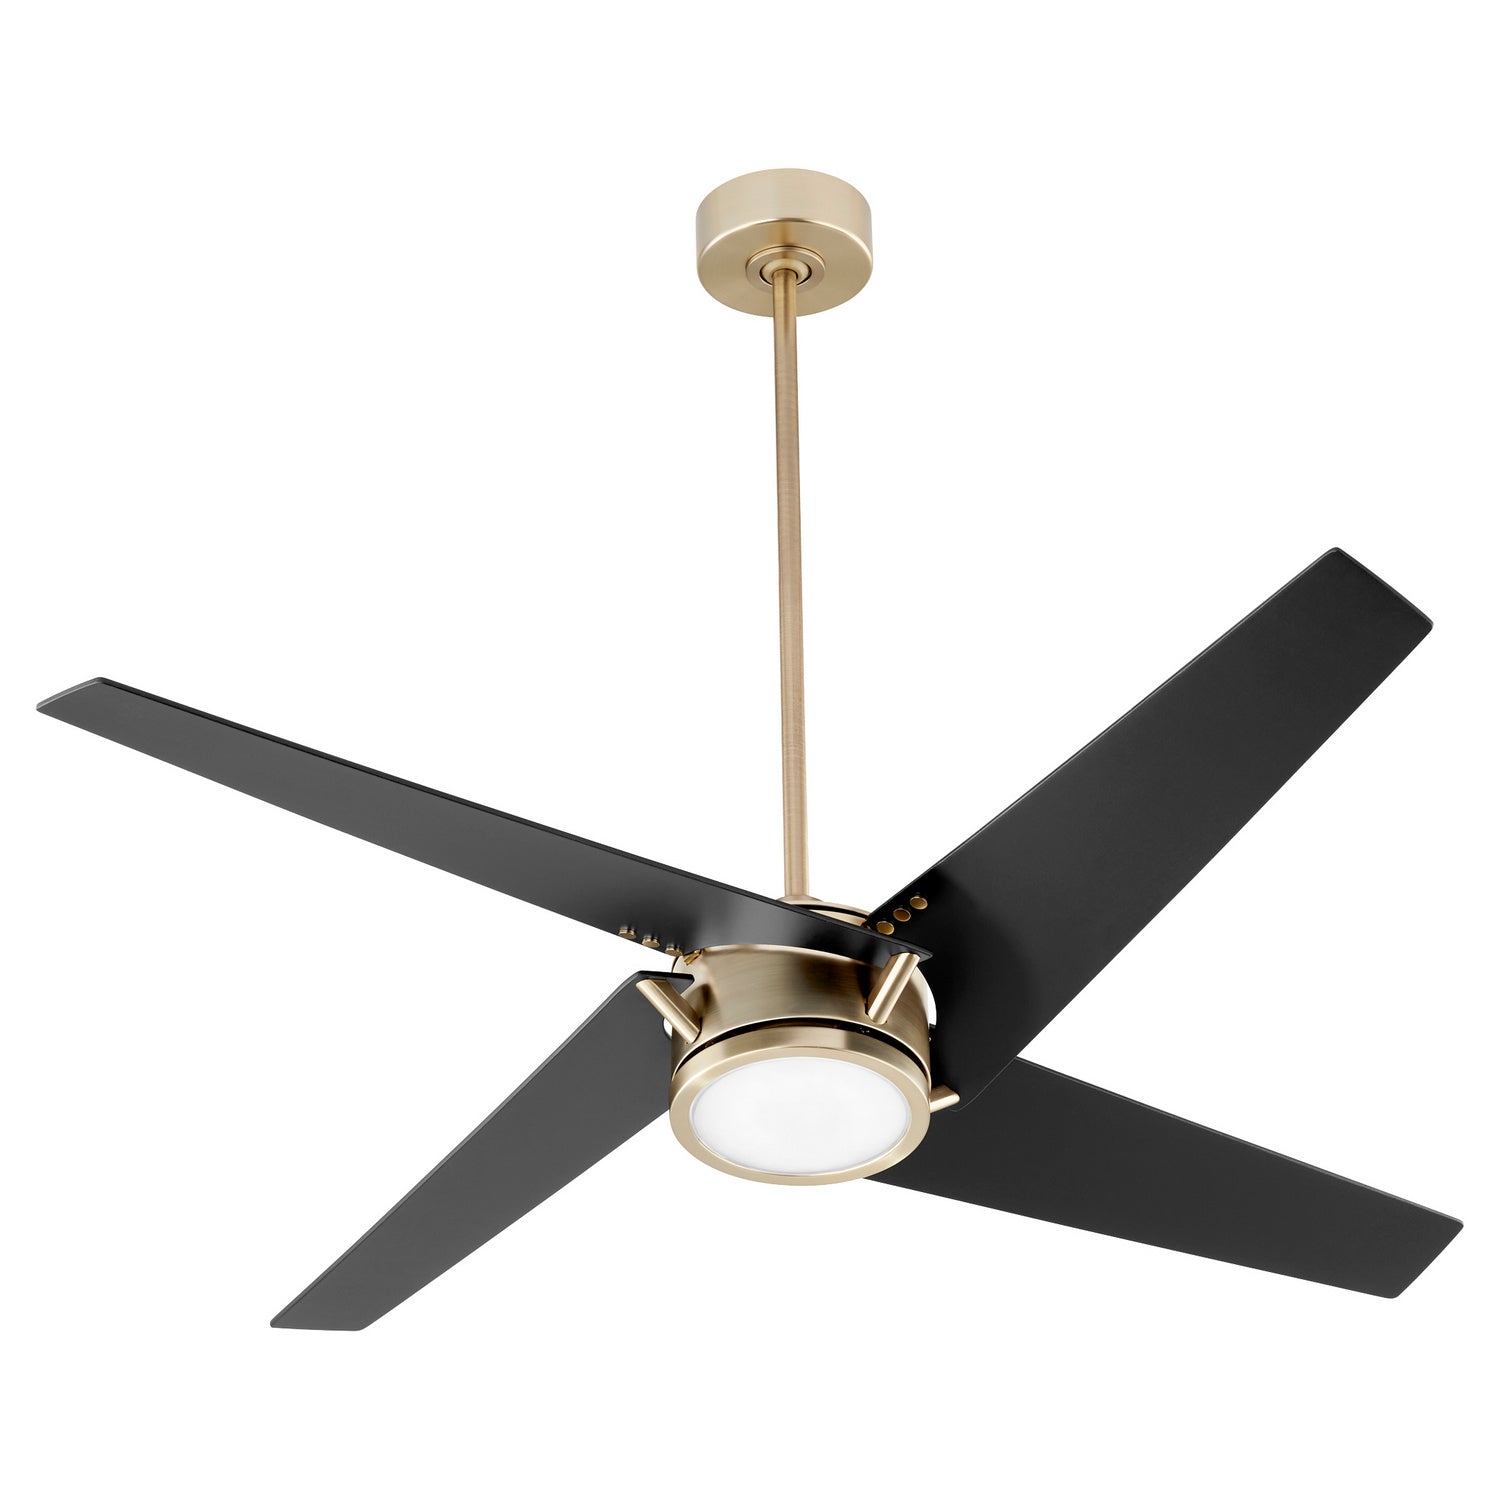 Quorum Axis 26544-80 Ceiling Fan - Aged Brass